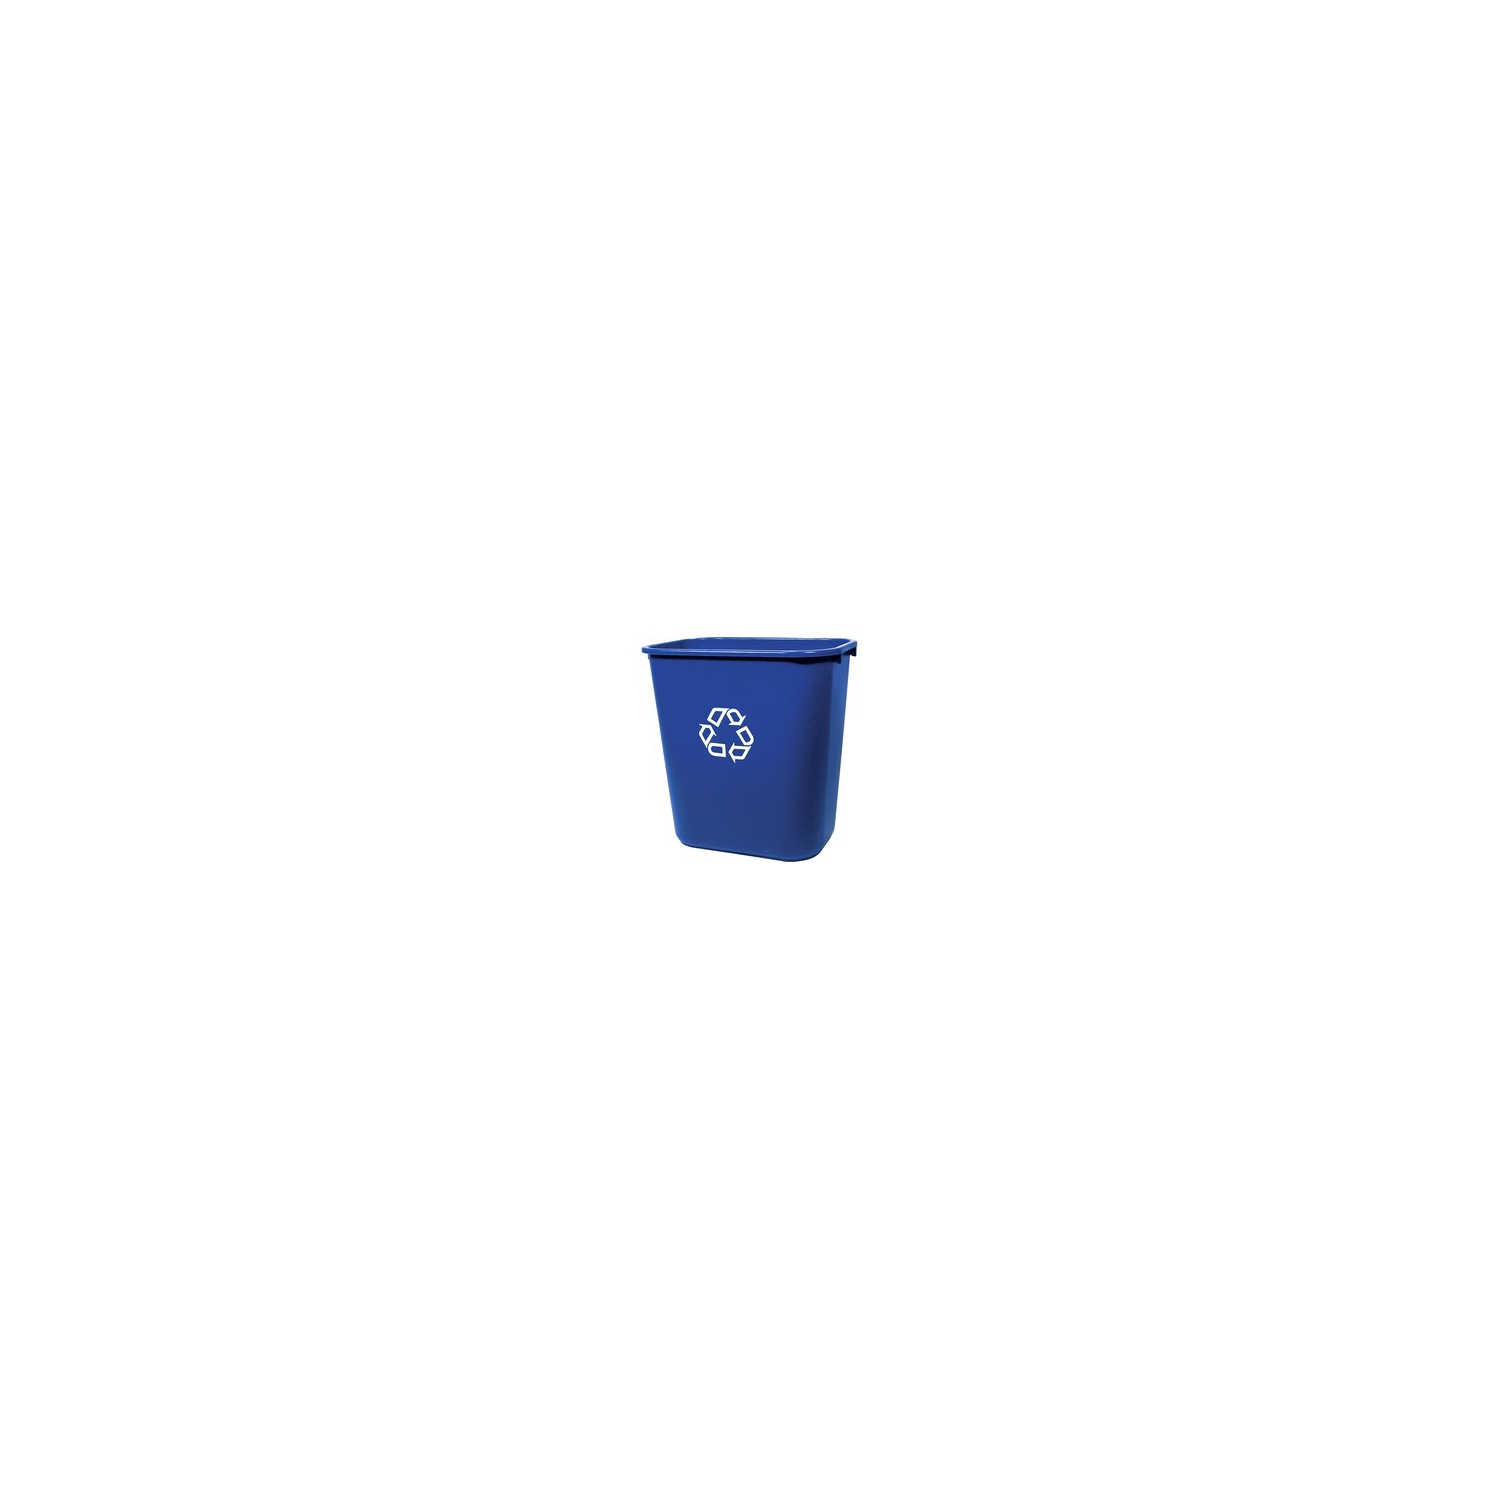 Rubbermaid 2956-73 Deskside Recycling Container (295673BLUE)